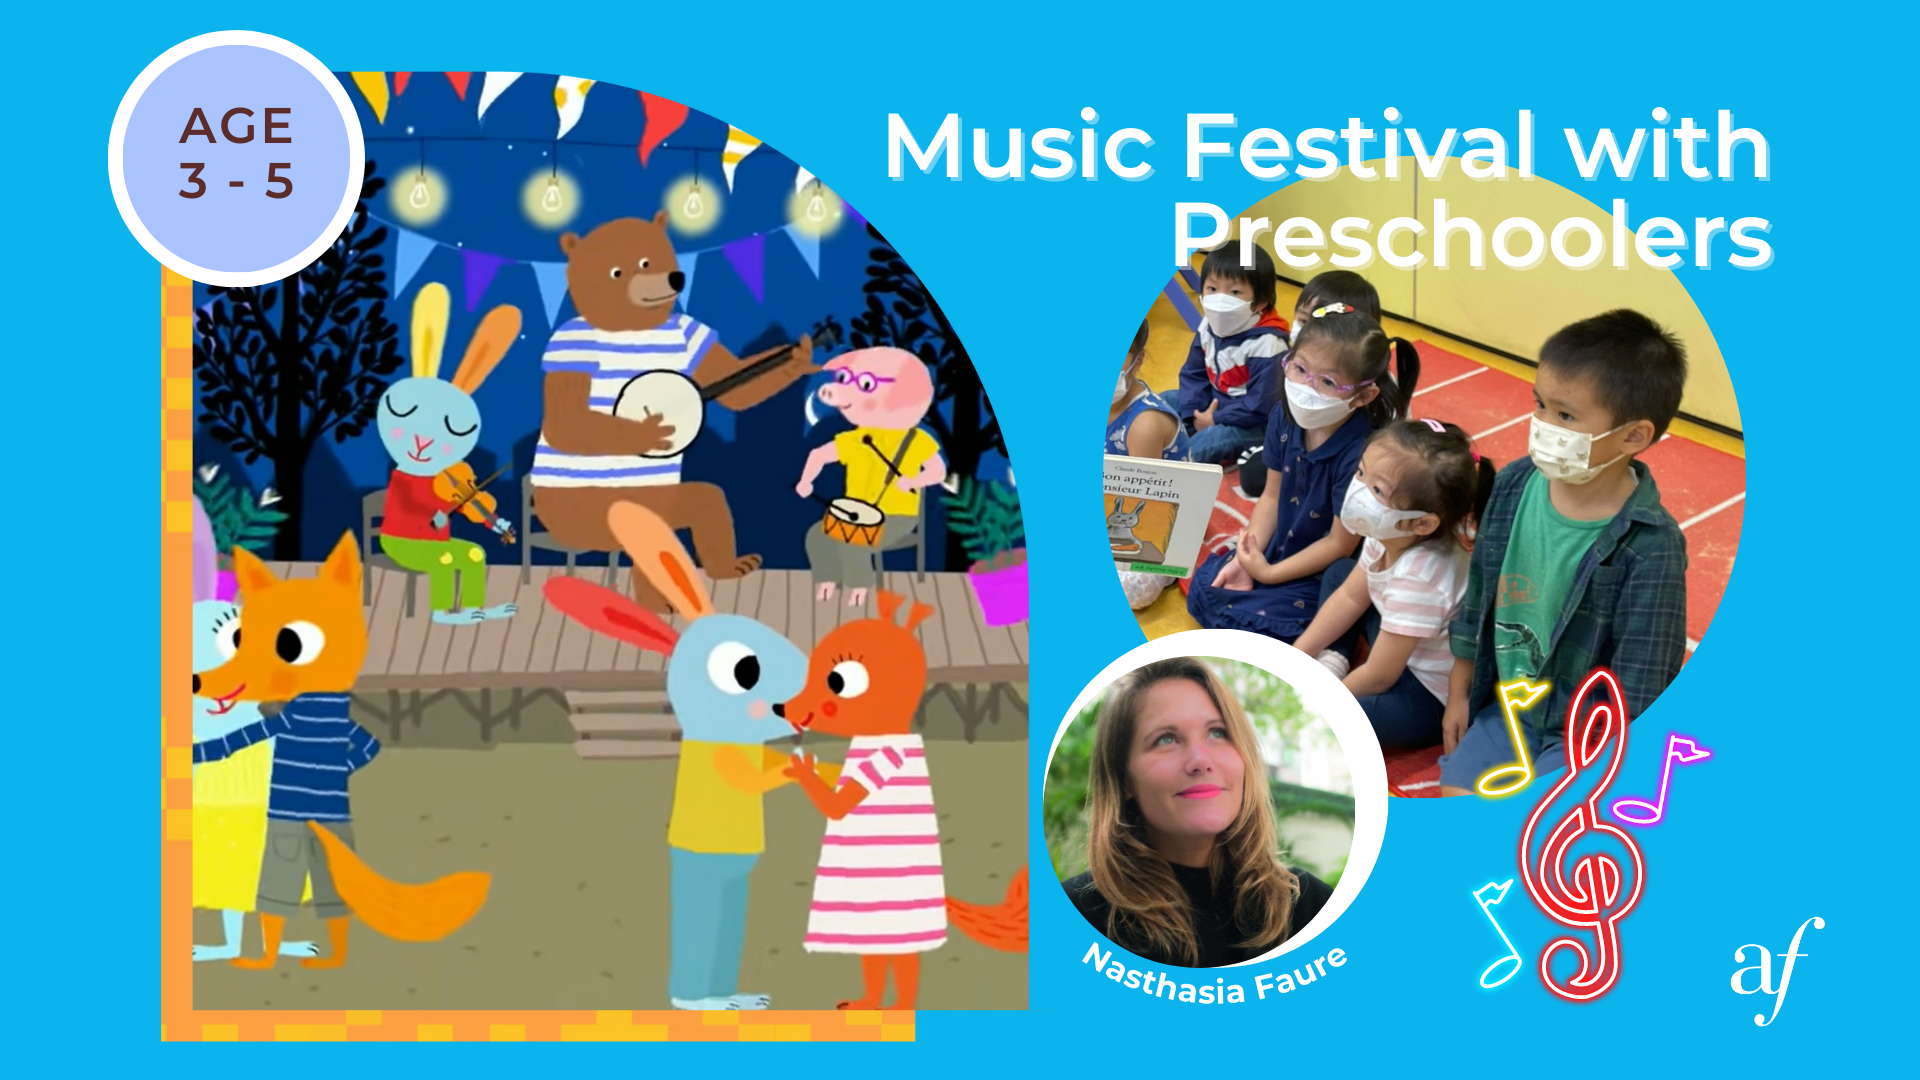 Music Festival with Preschoolers I